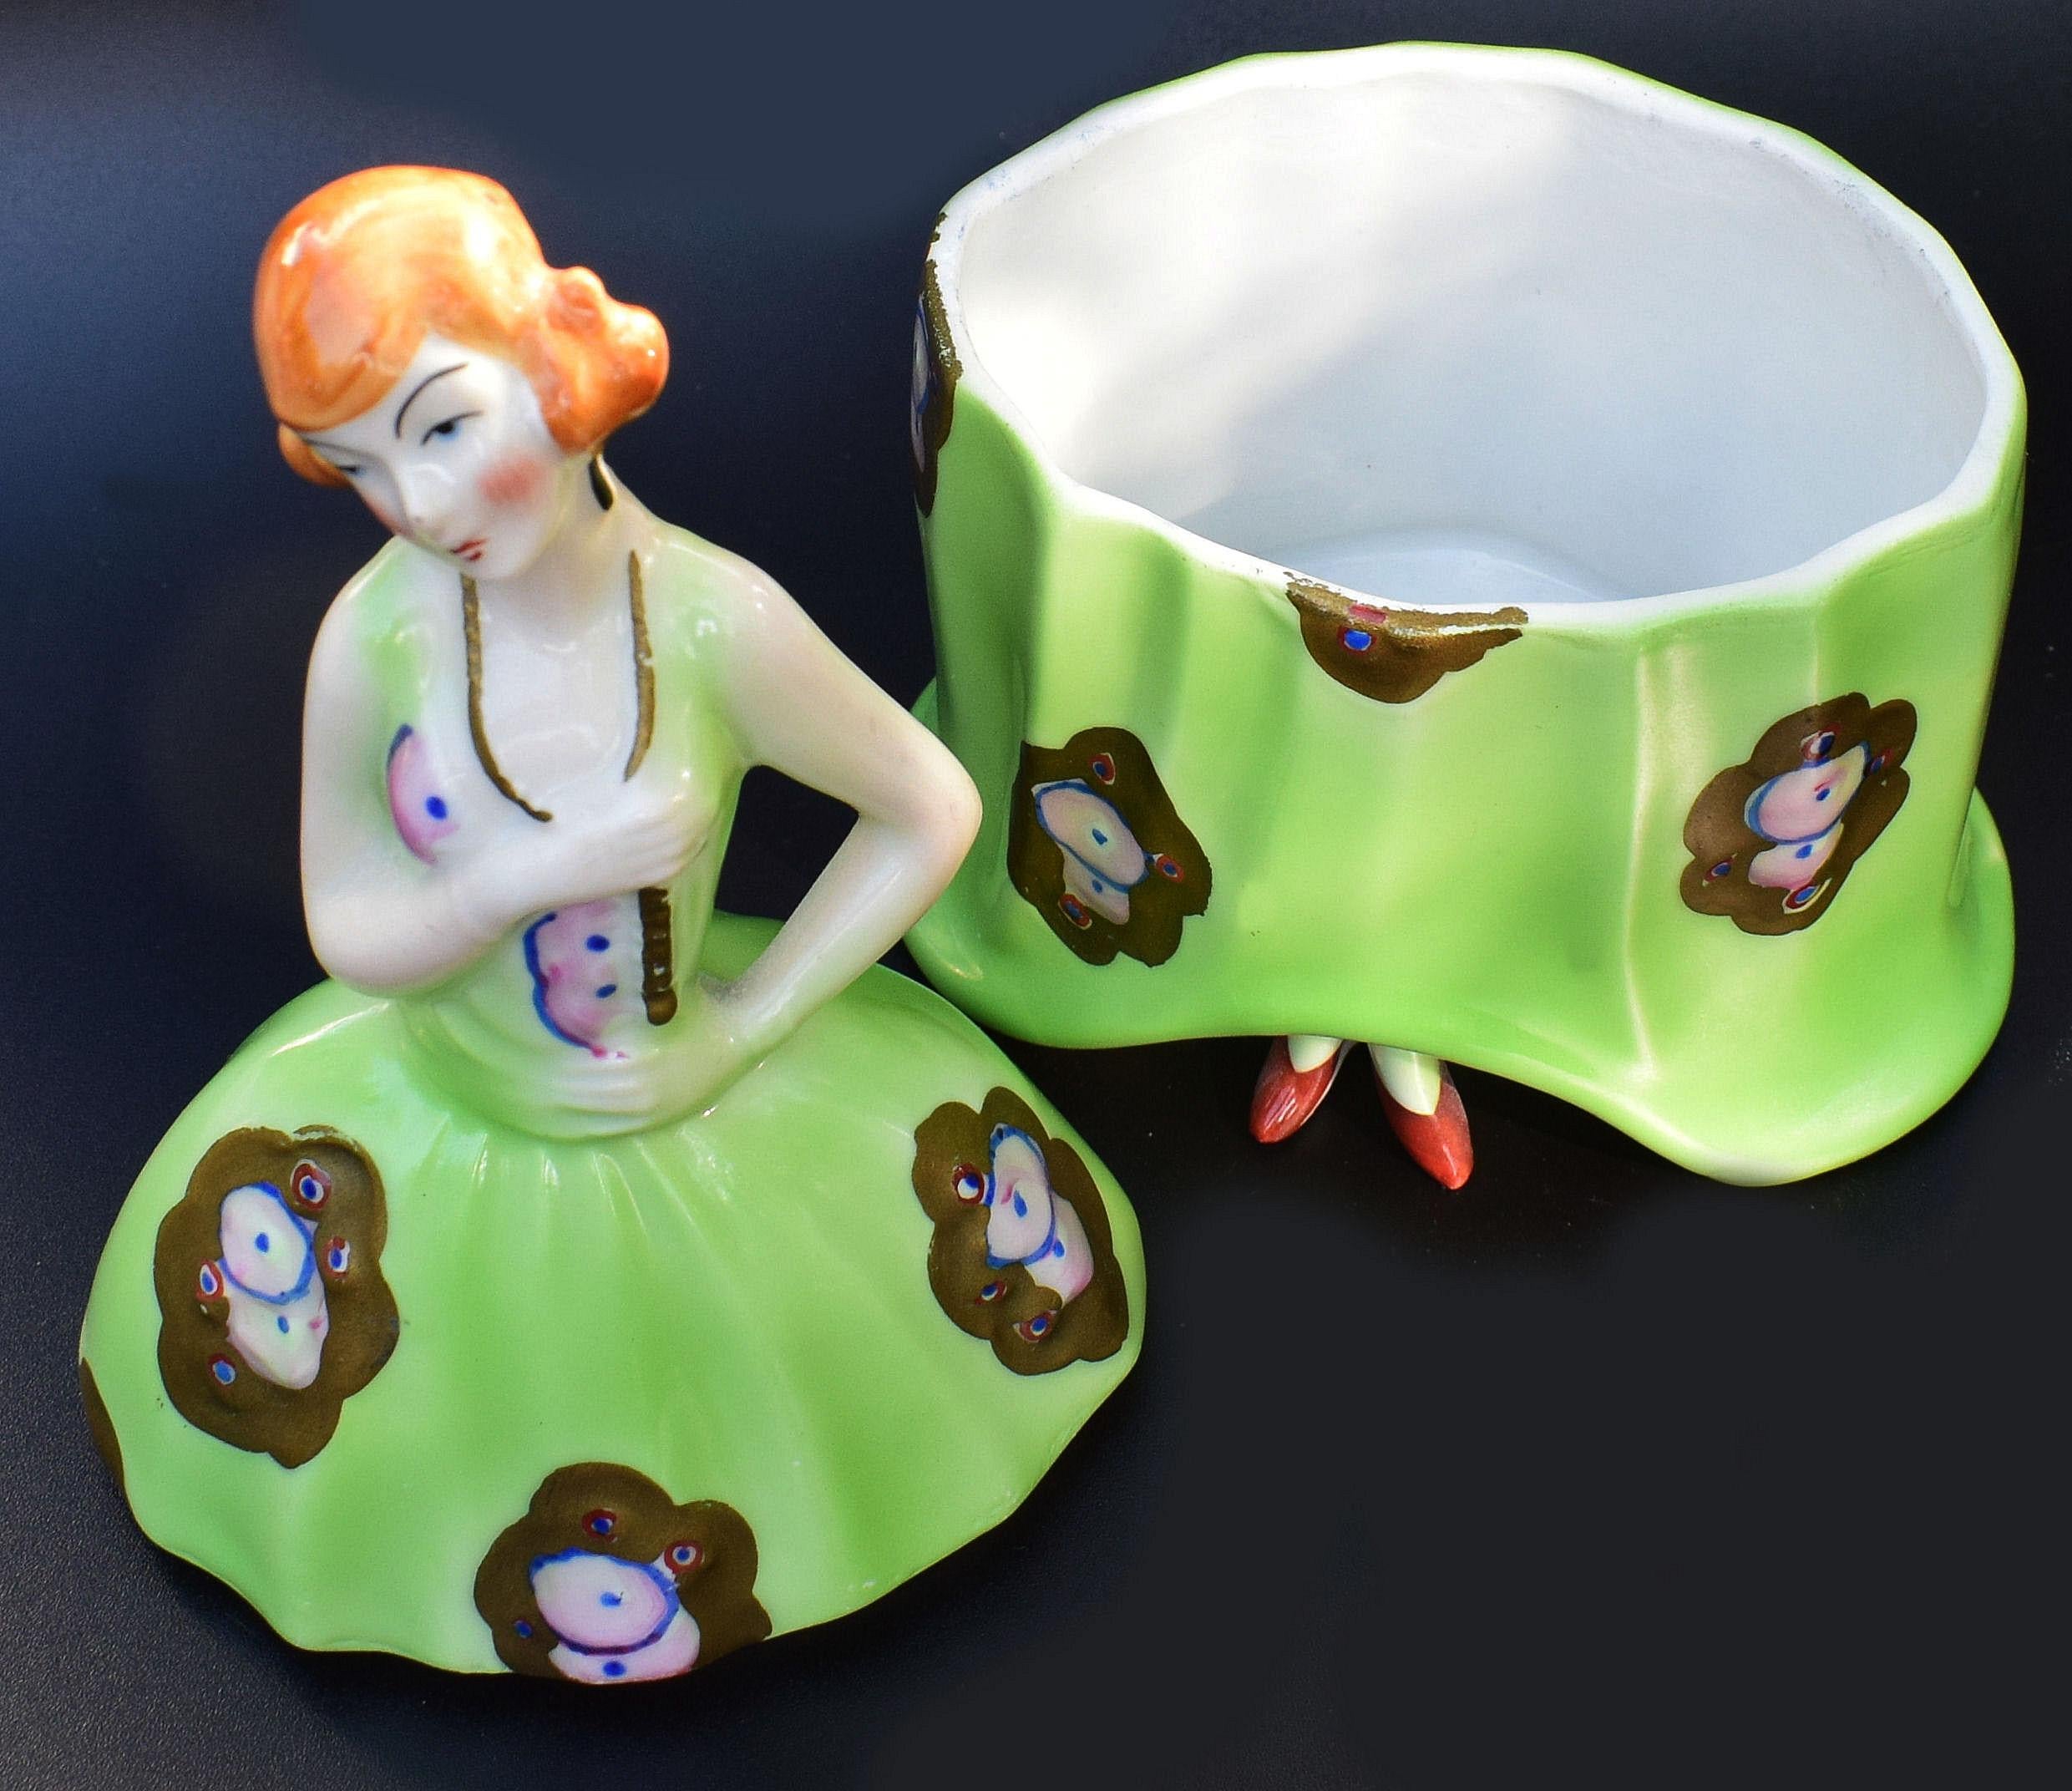 Beautifully styled is this 1930s Art Deco French Bonbonniere. Part of the half doll, powder box, jar family. Typical Art Deco coloring which is as bright and crisp as when first manufactured. The glaze is also free from crazing. Wonderfully styled